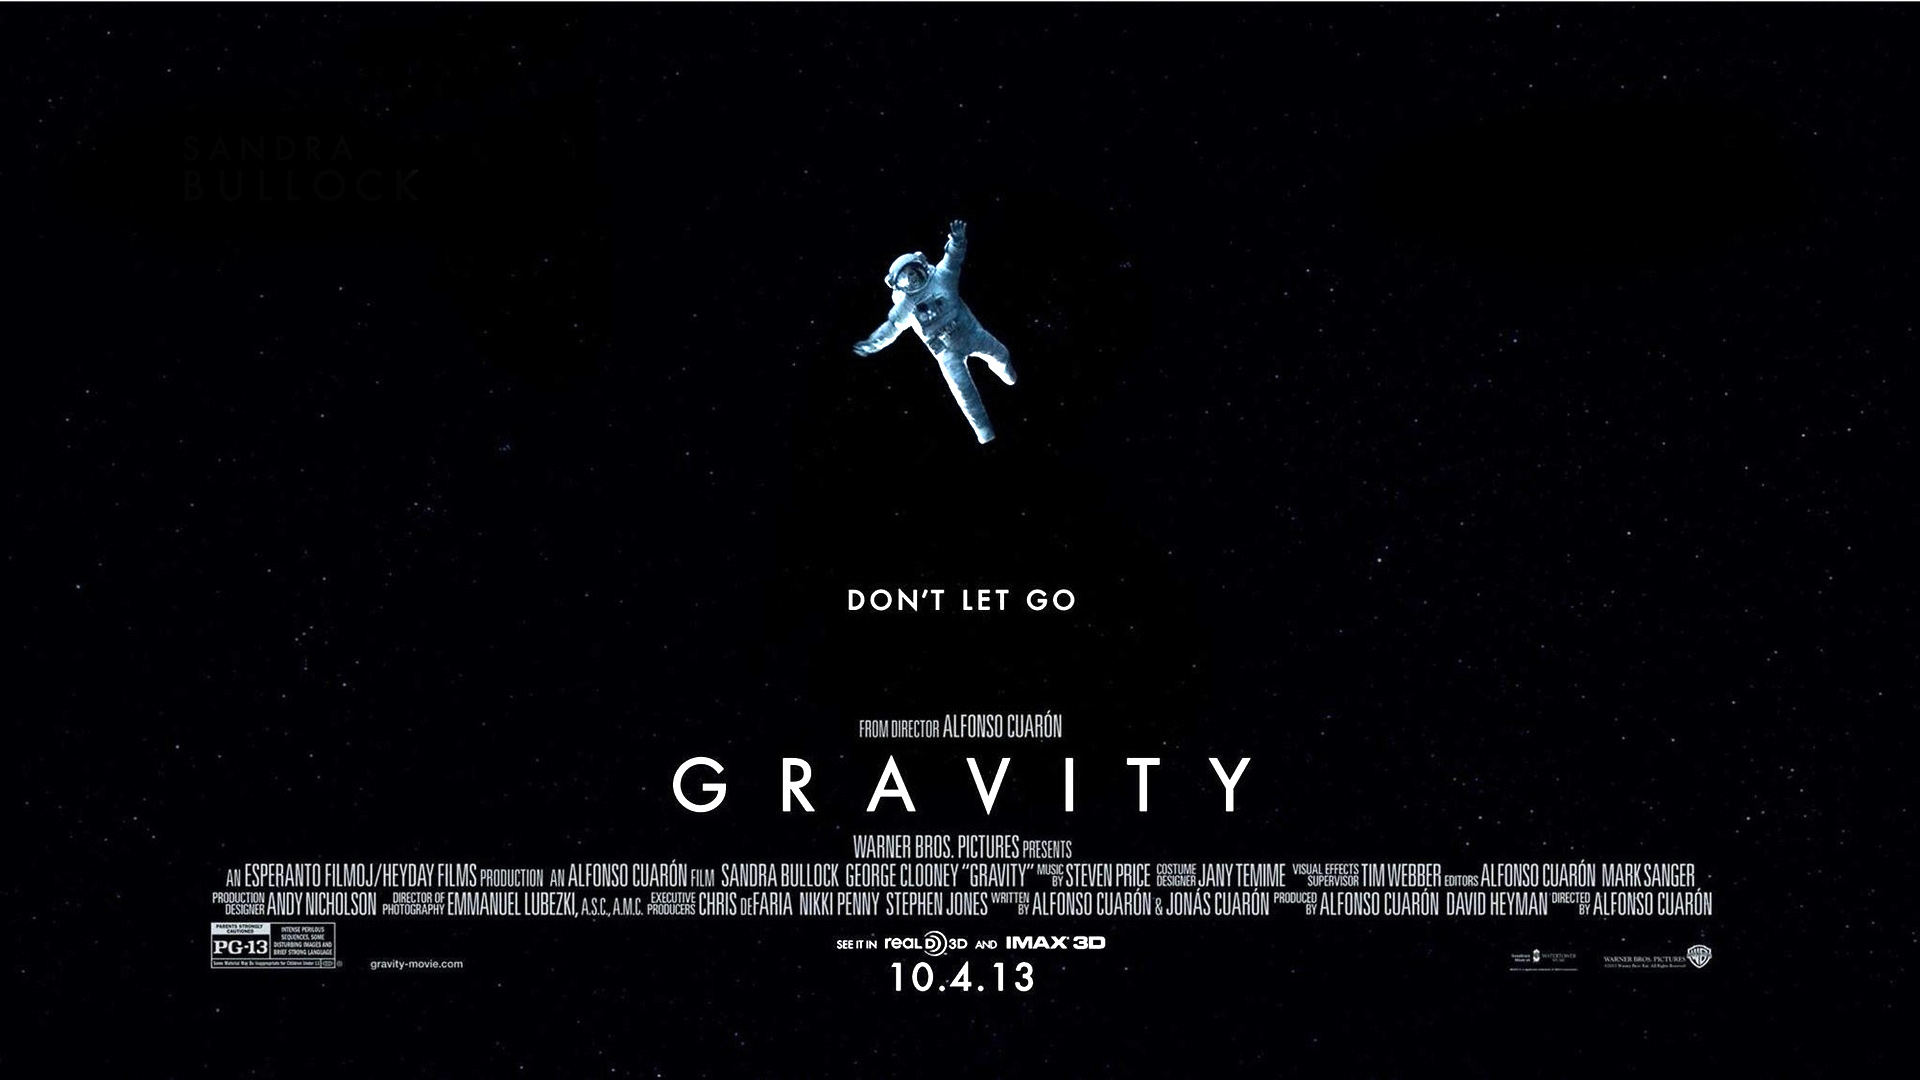 Gravity Movie Wallpapers | Wallpaper 4of 4 | Gravity Movie images | Gravity